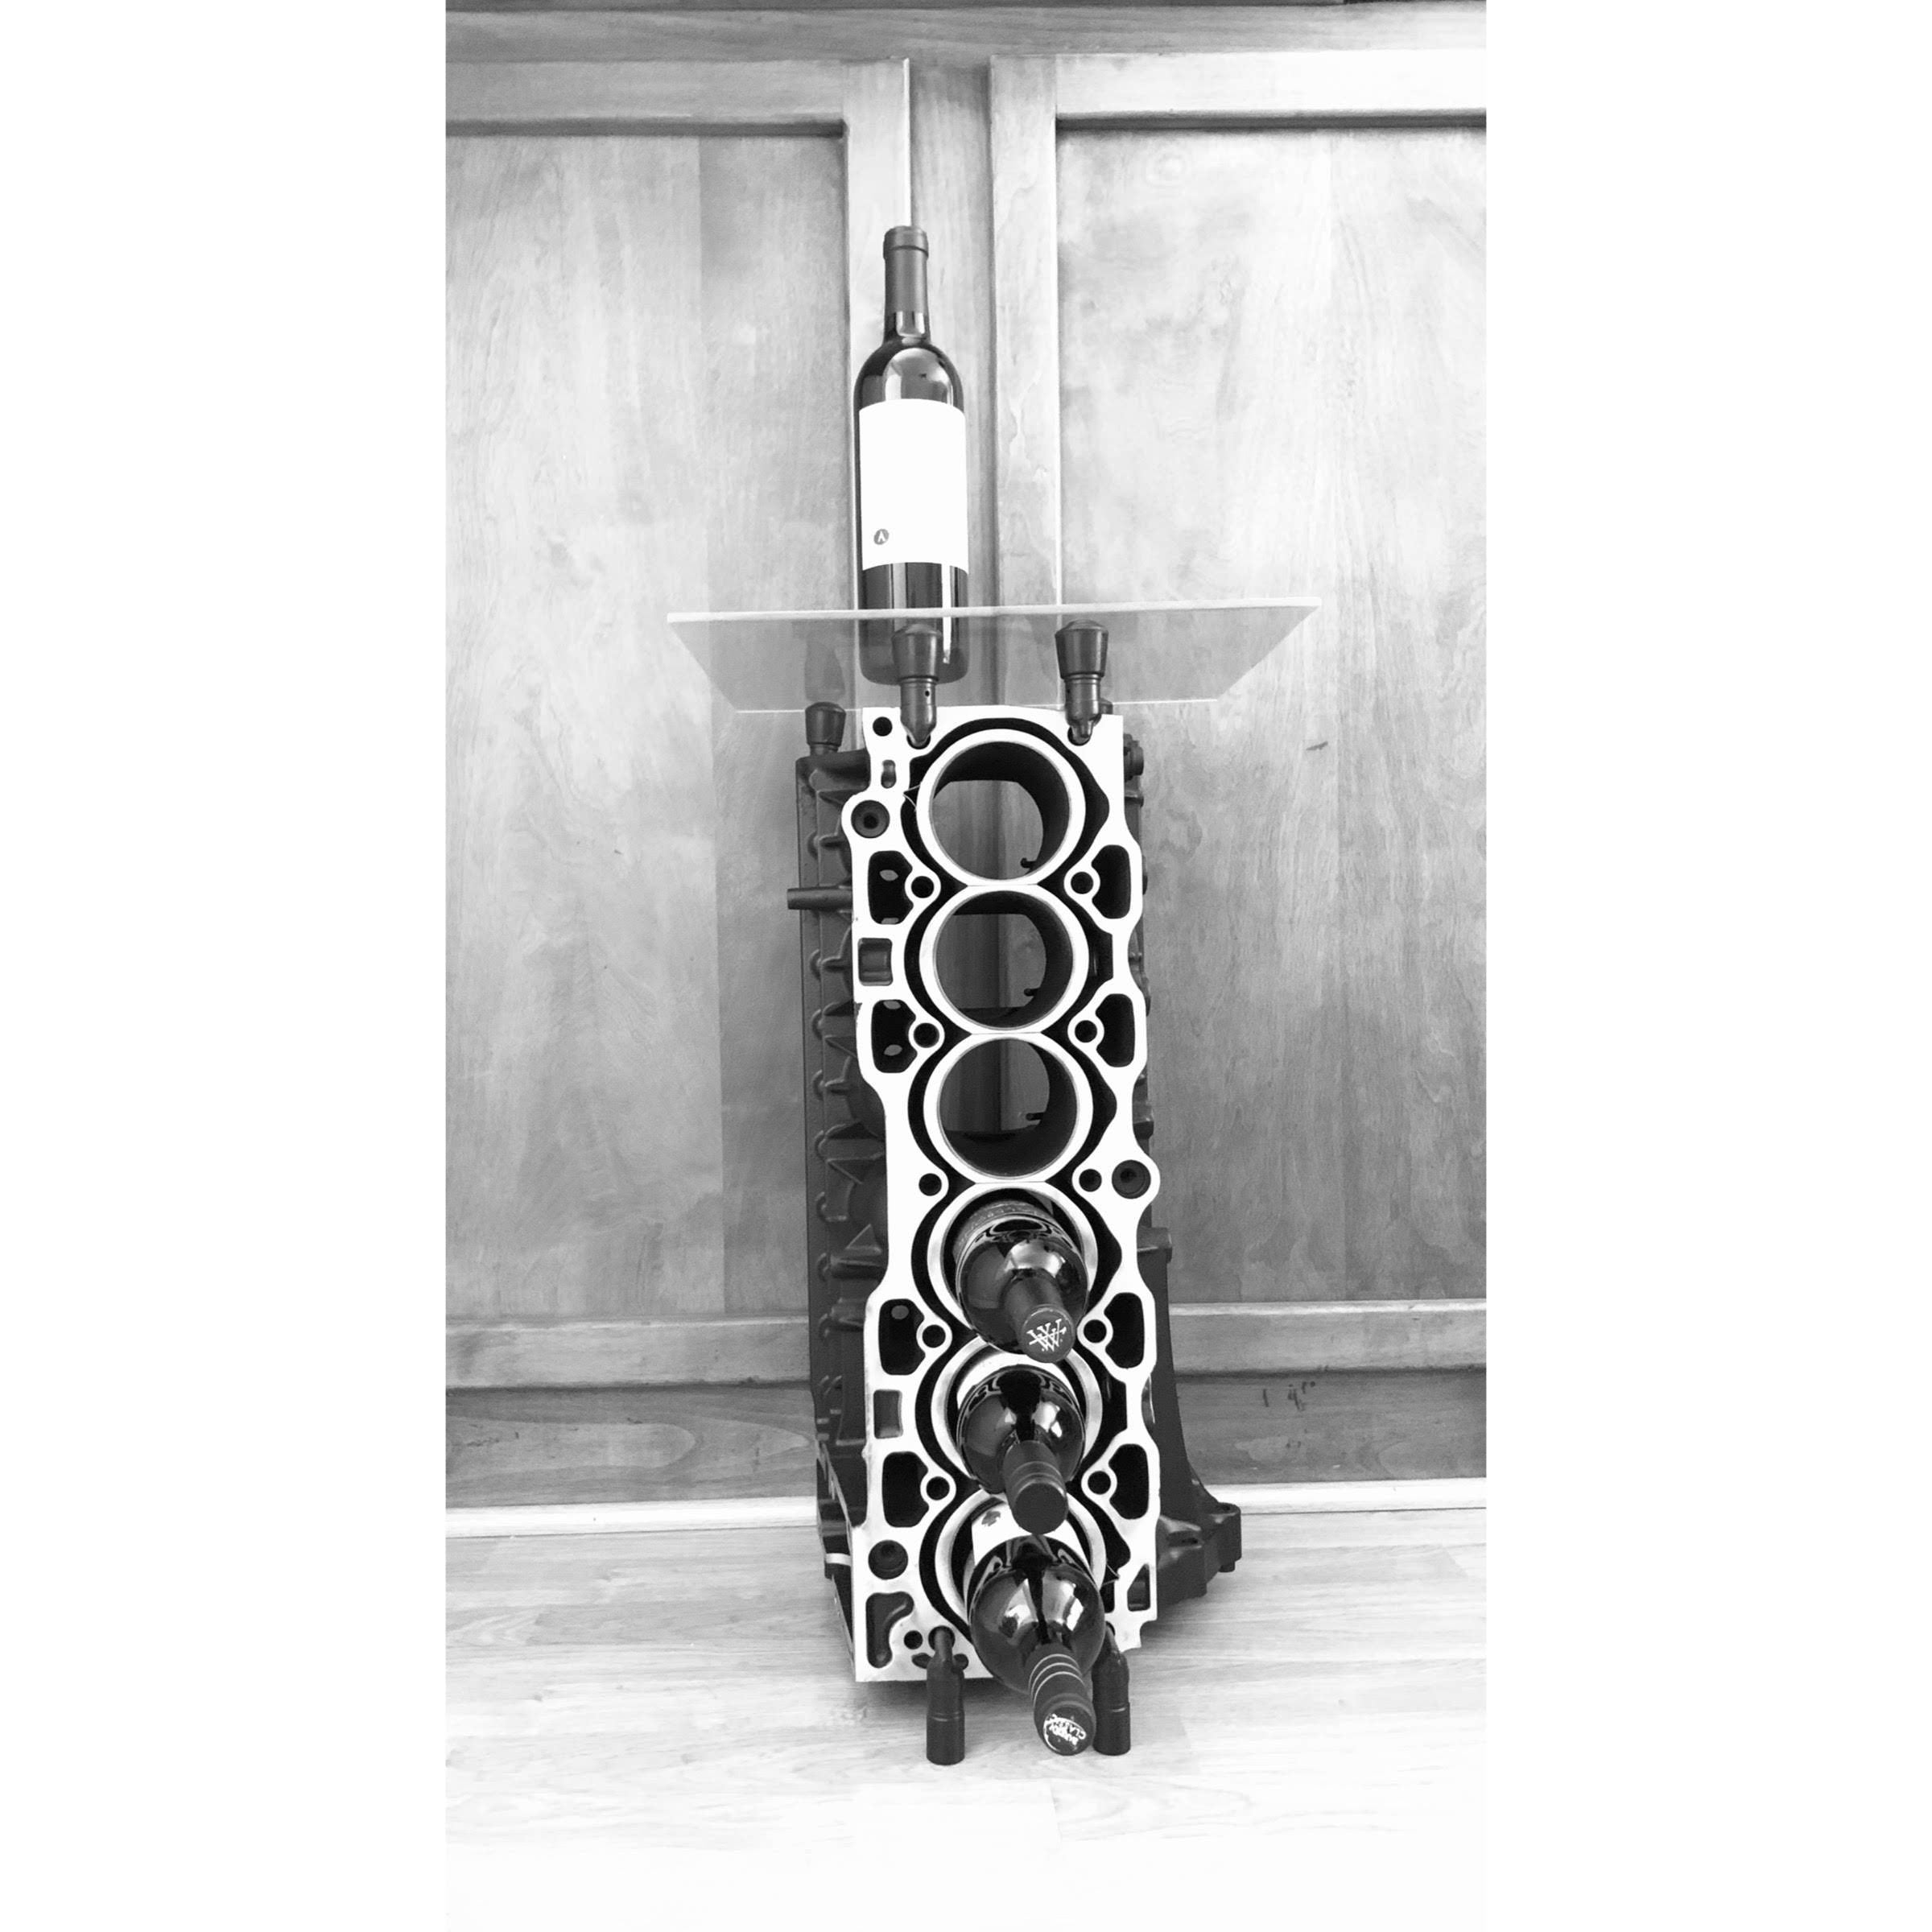 Engine block wine rack finished in black with a square glass top, wine bottles stored in its side and a wine bottle on top.